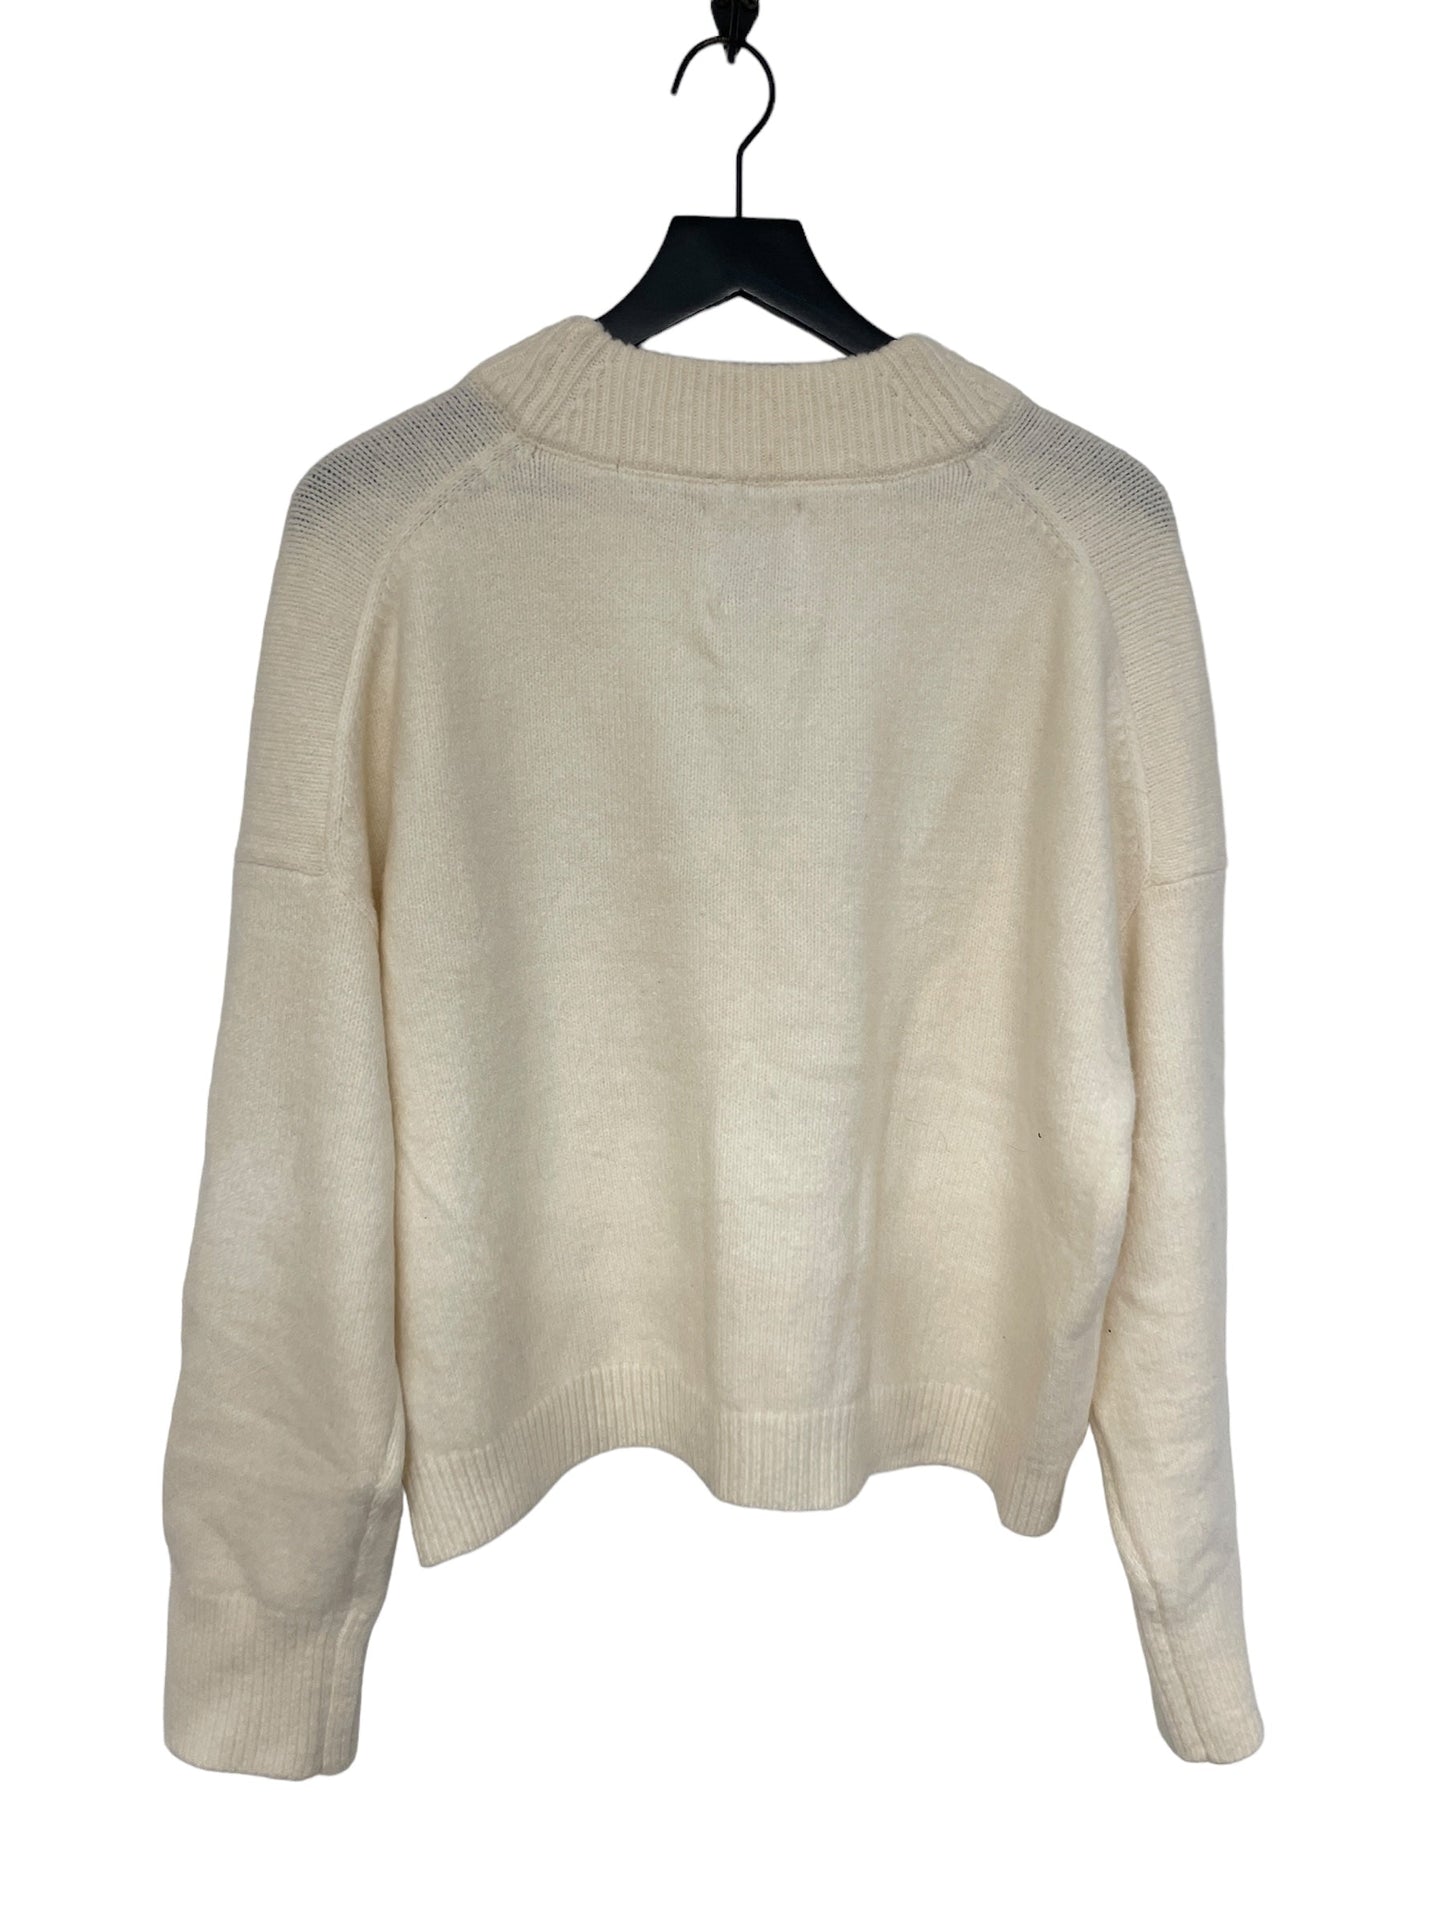 Sweater By Abercrombie And Fitch  Size: M